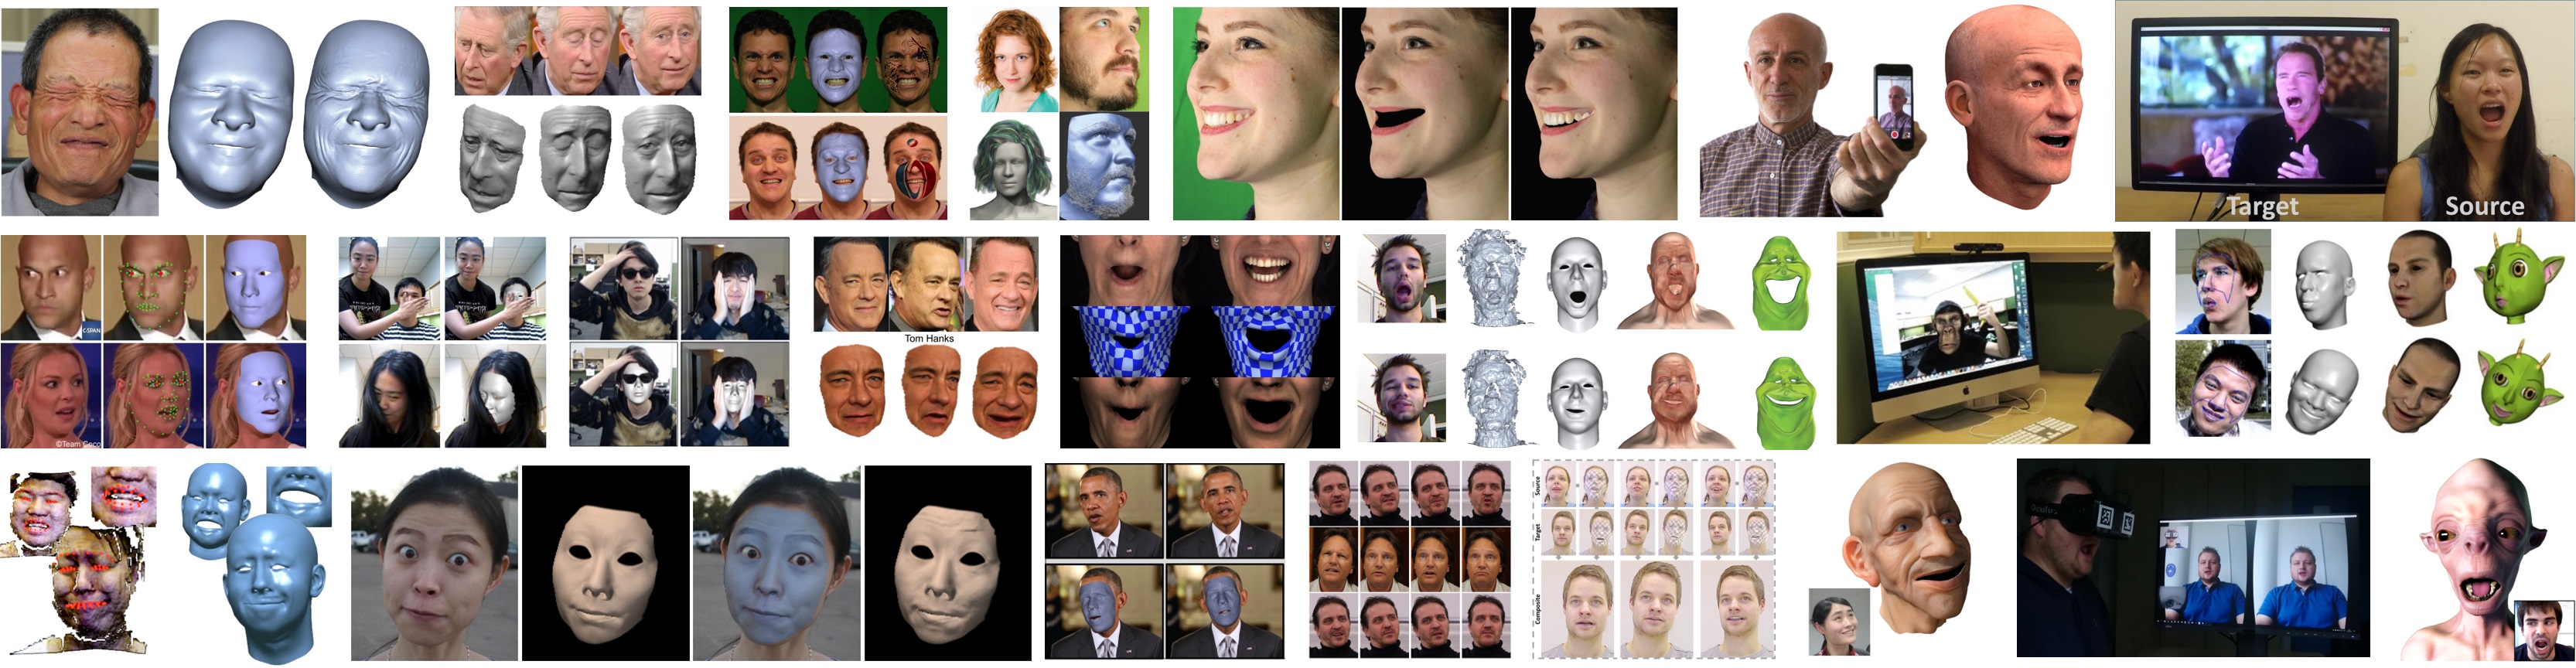 Eurographics 2018: State of the Art on Monocular 3D Face Reconstruction, Tracking, and Applications